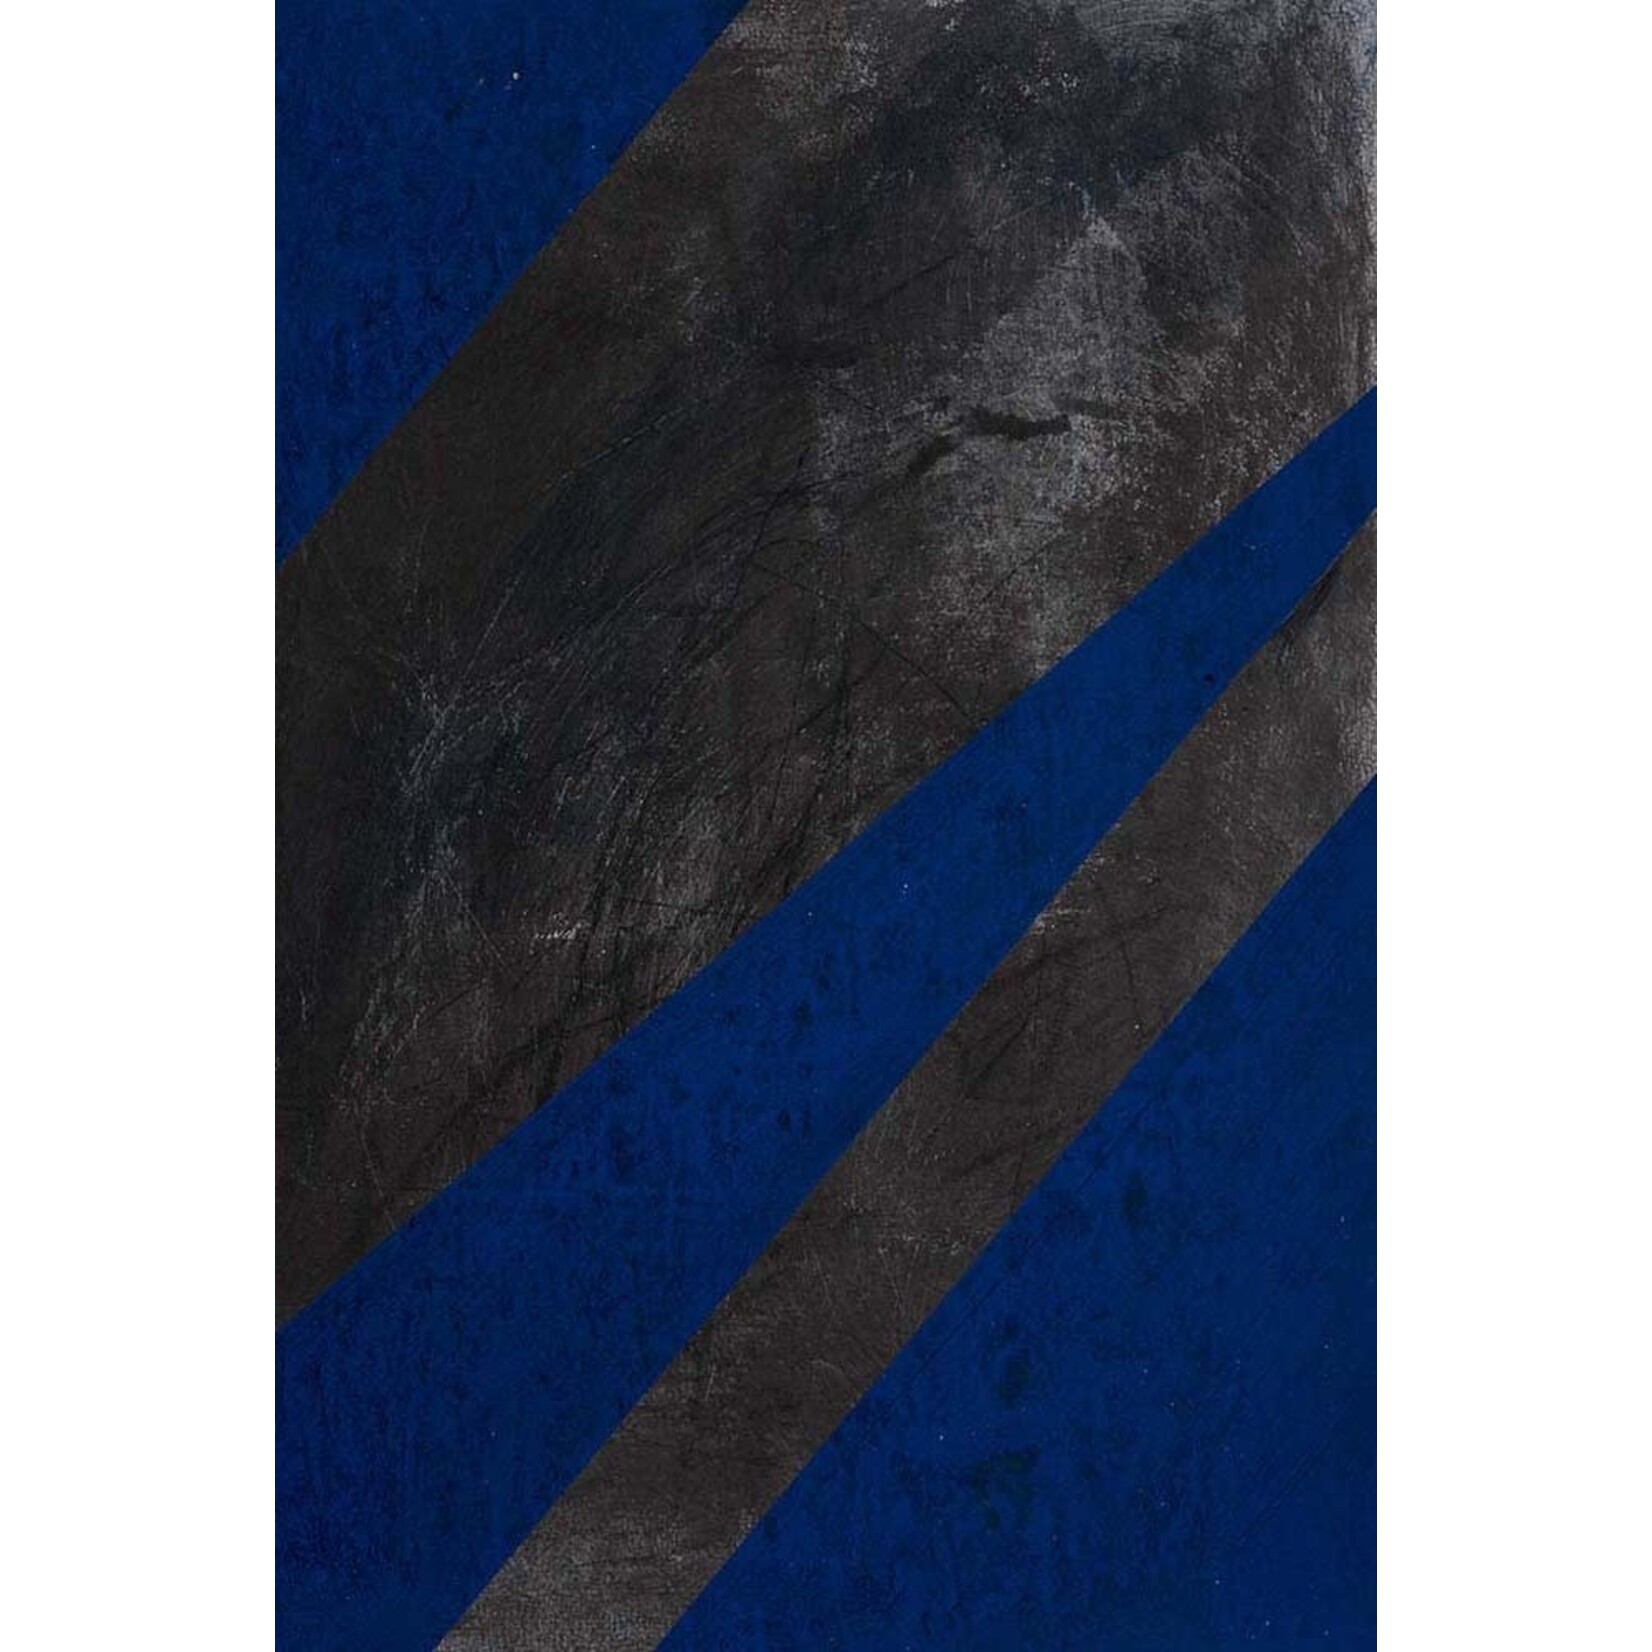 Stretched Print on Canvas Black and Blue 2 Canvas by Evelyn Ogly